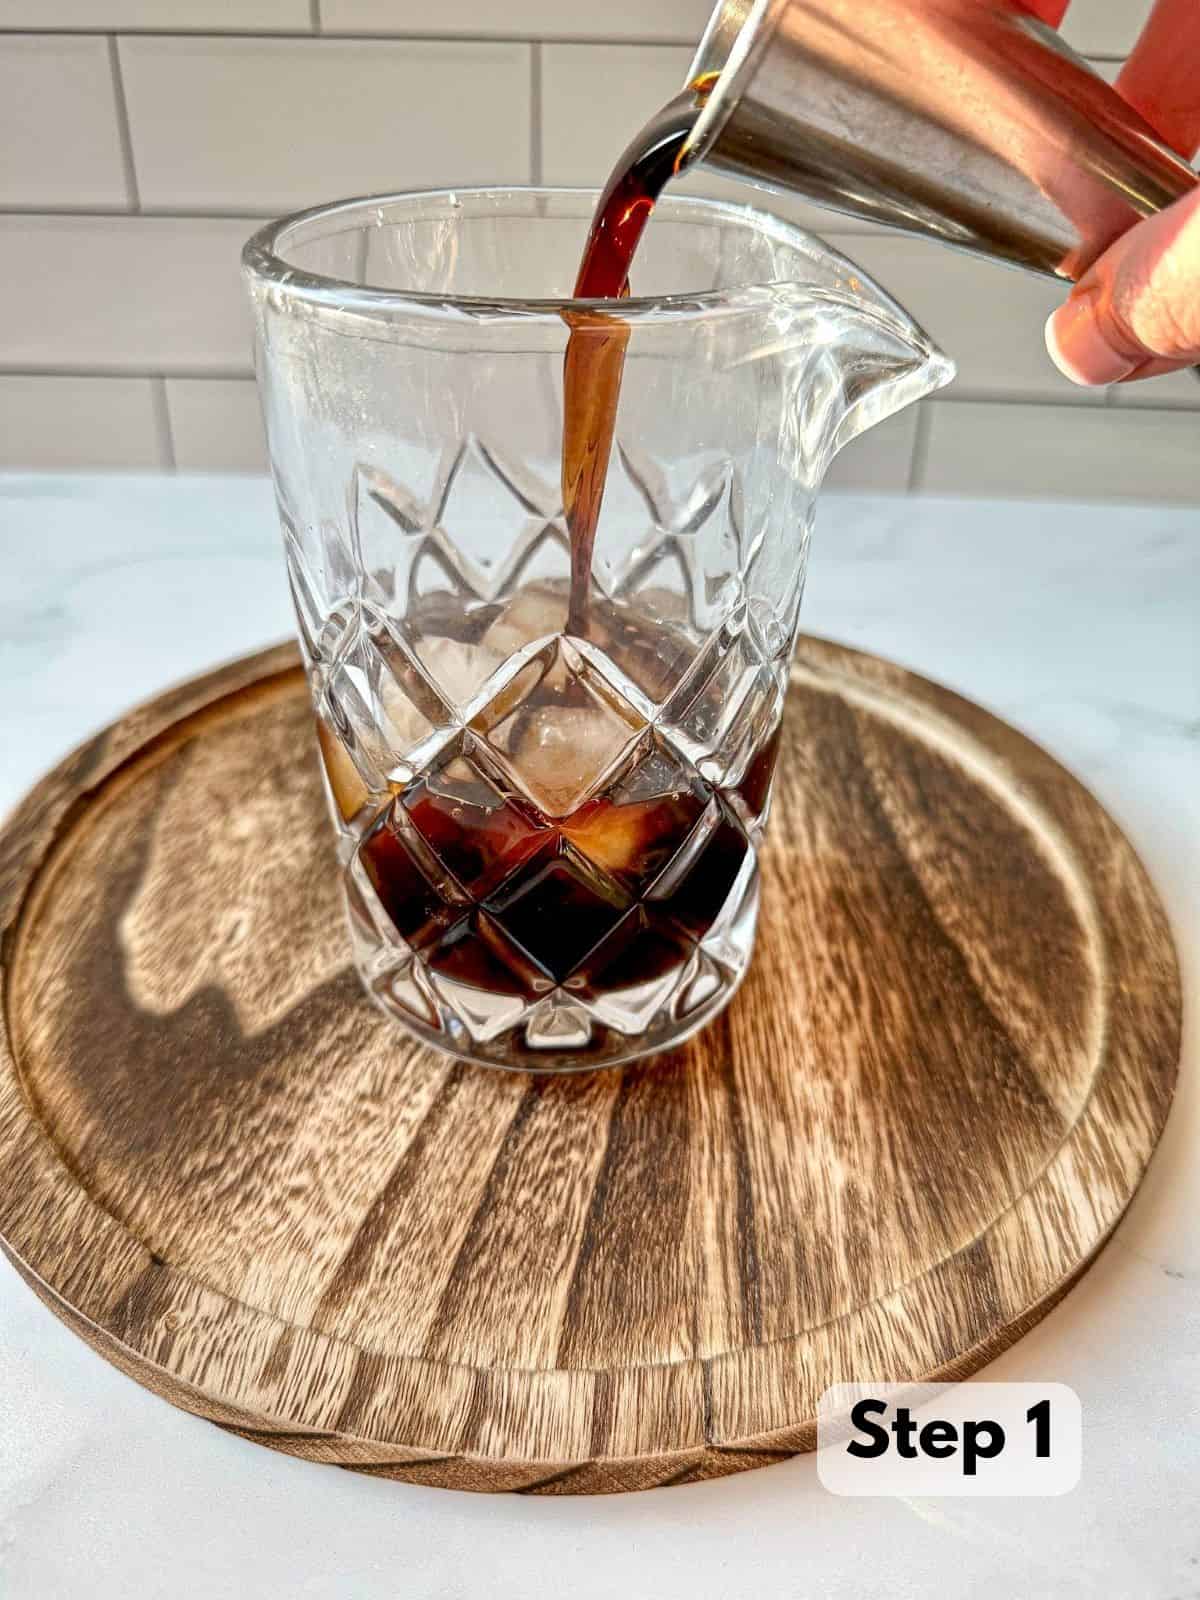 Black cold brew coffee being poured into a cocktail mixing glass.